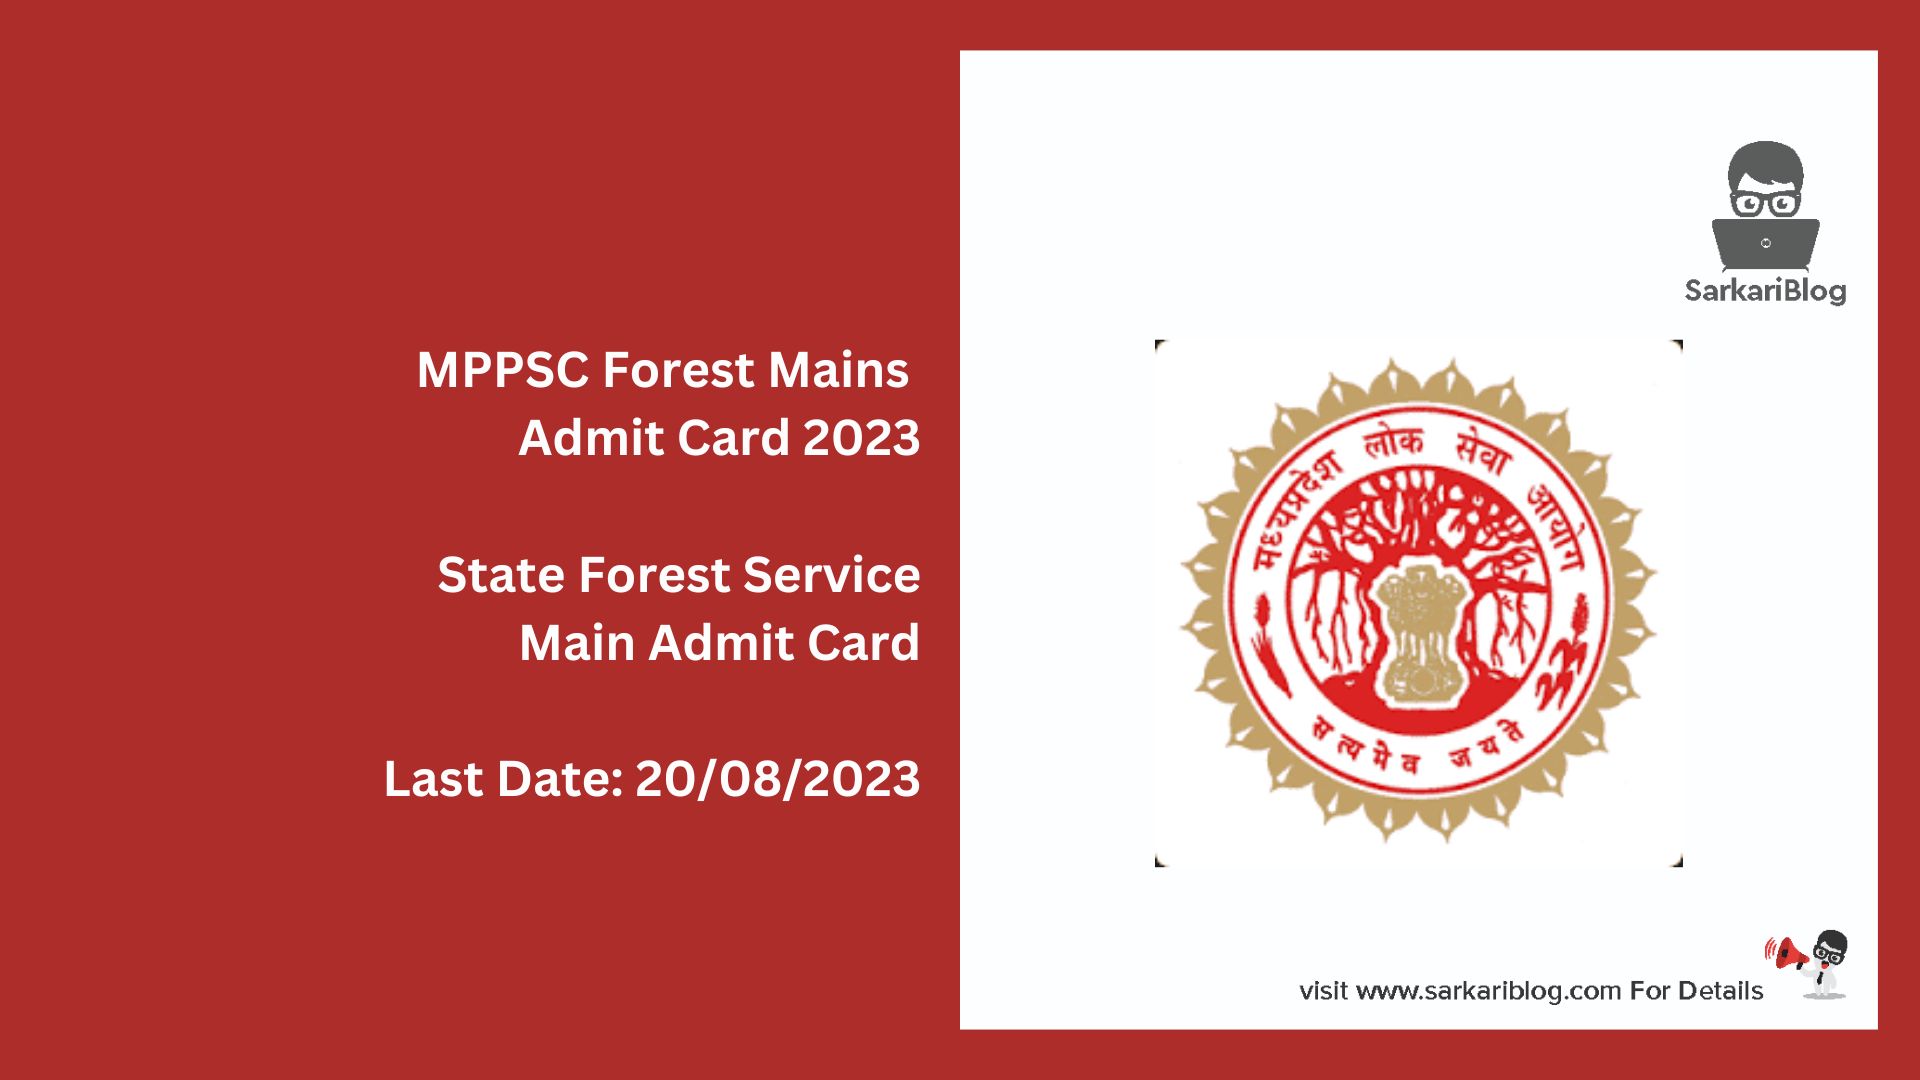 MPPSC Forest Mains Admit Card 2023